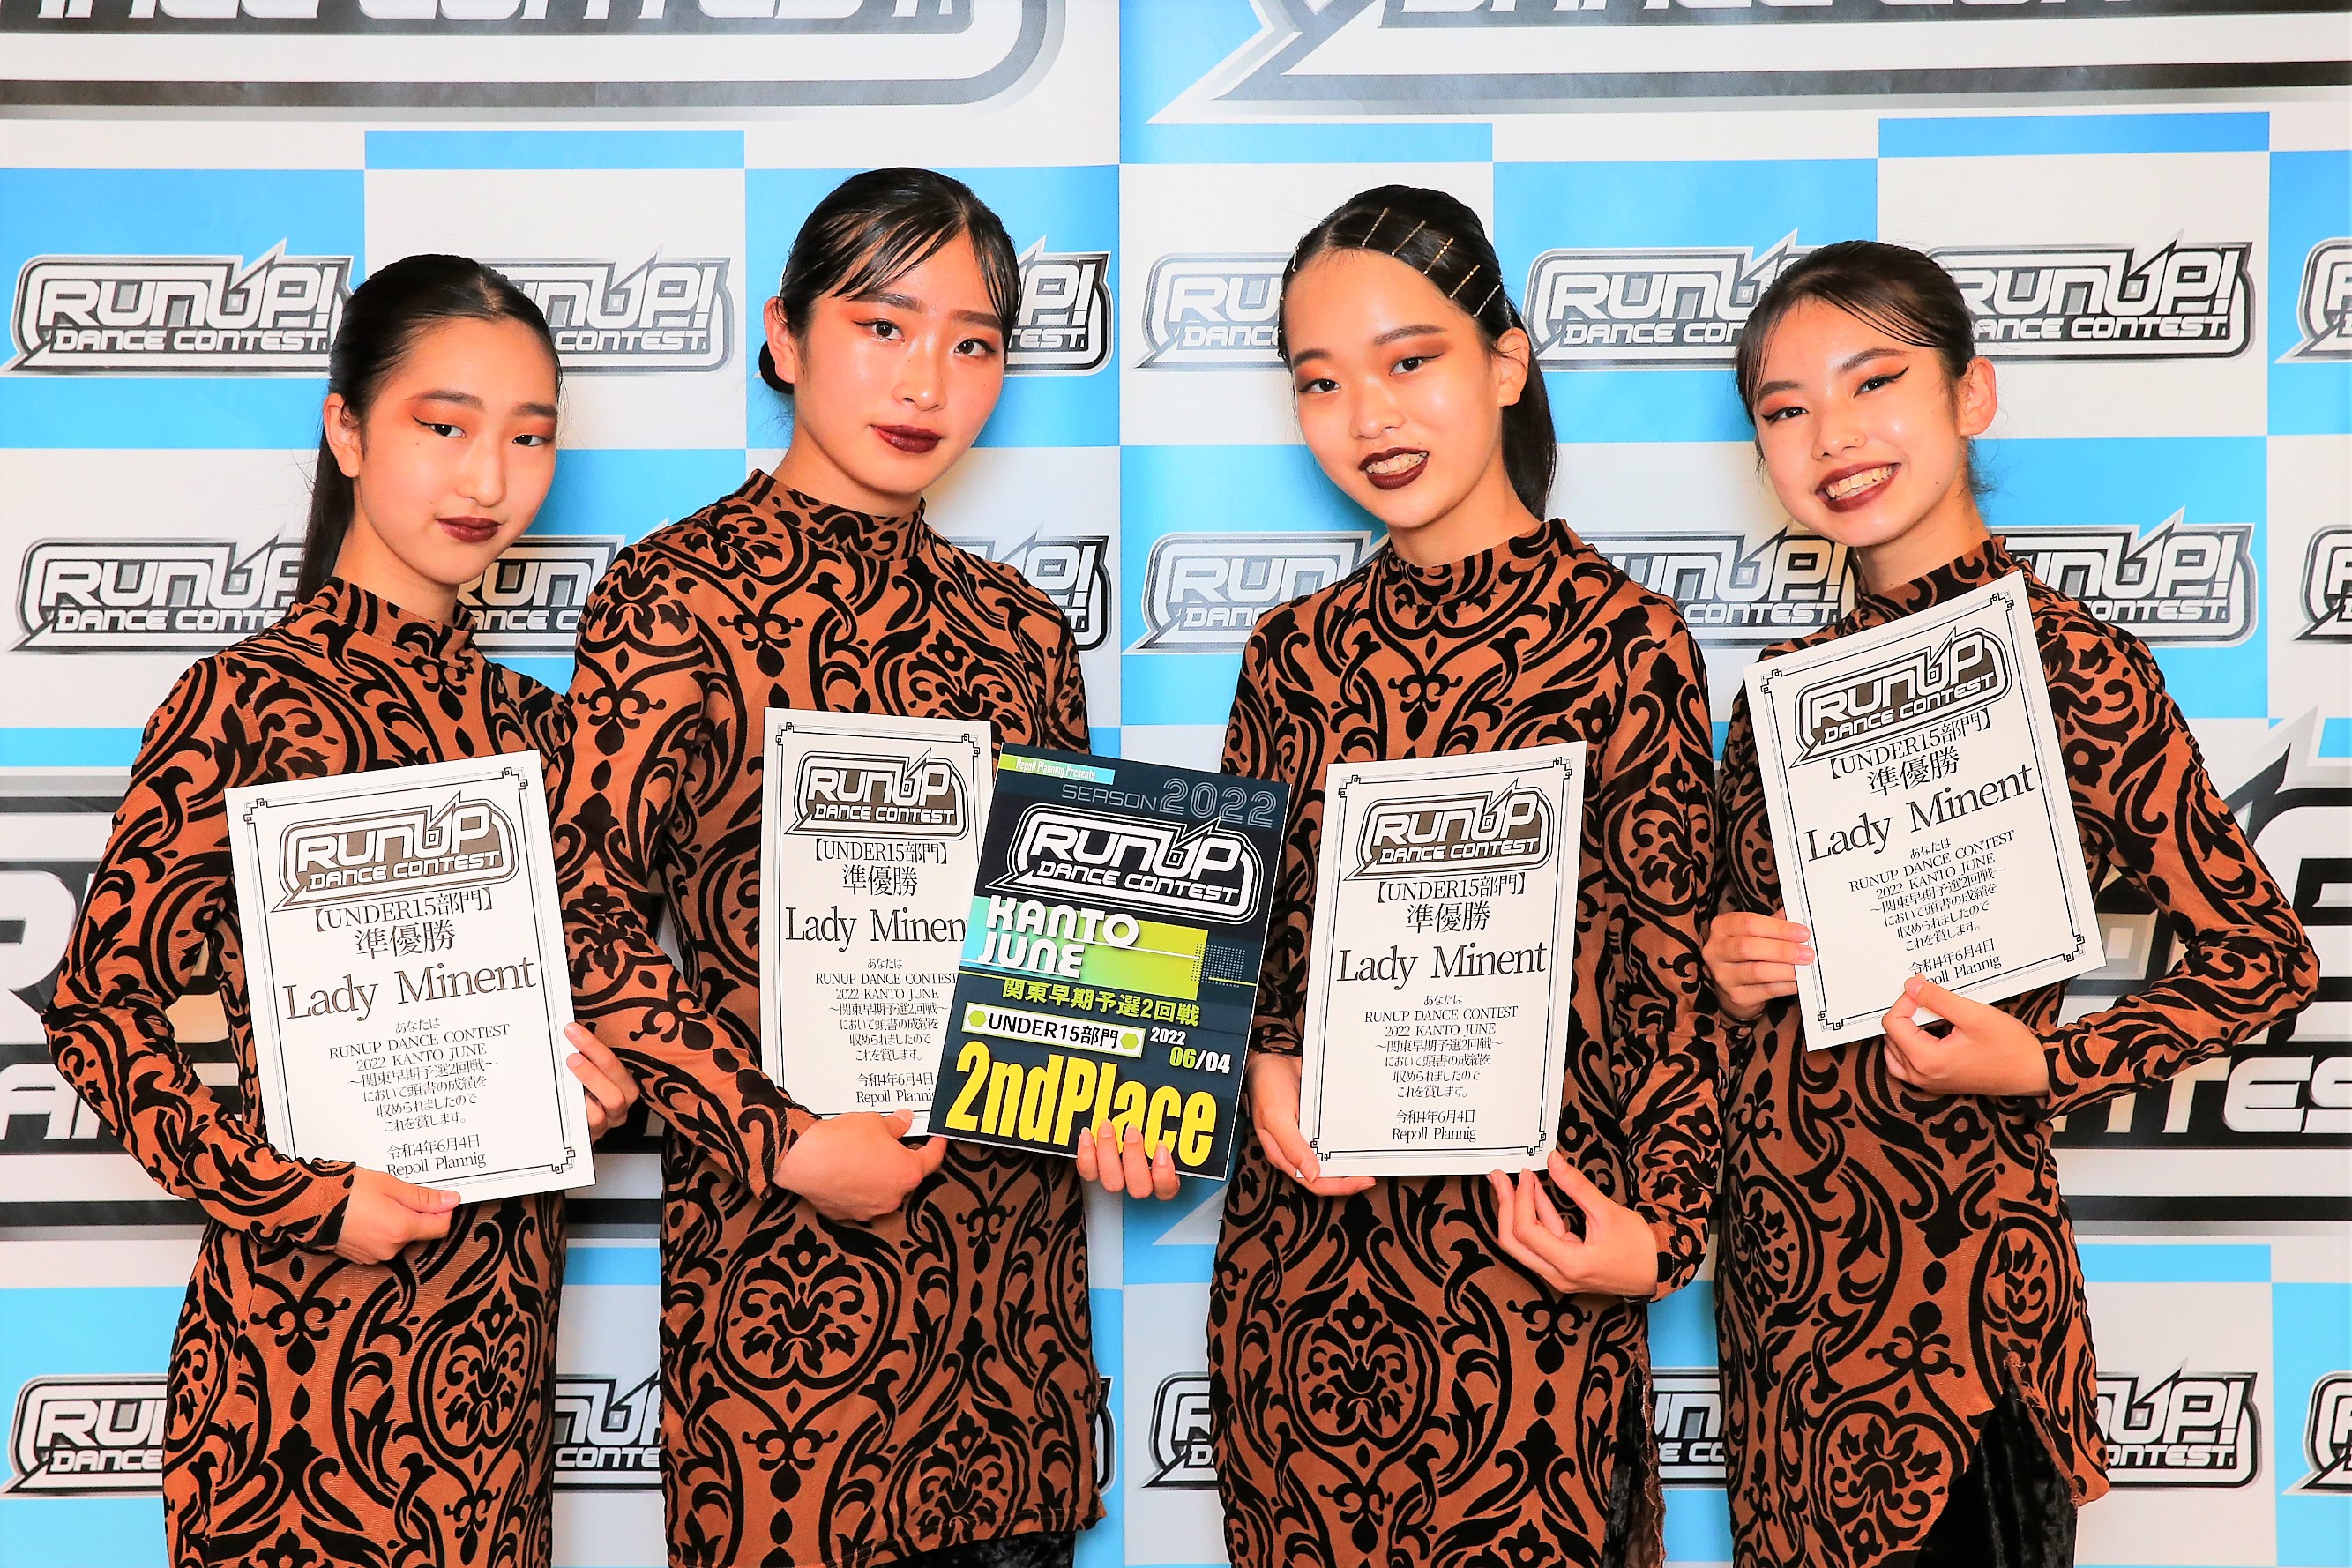 RUNUP 2022 KANTO JUNE UNDER15部門 準優勝 Lady Minent